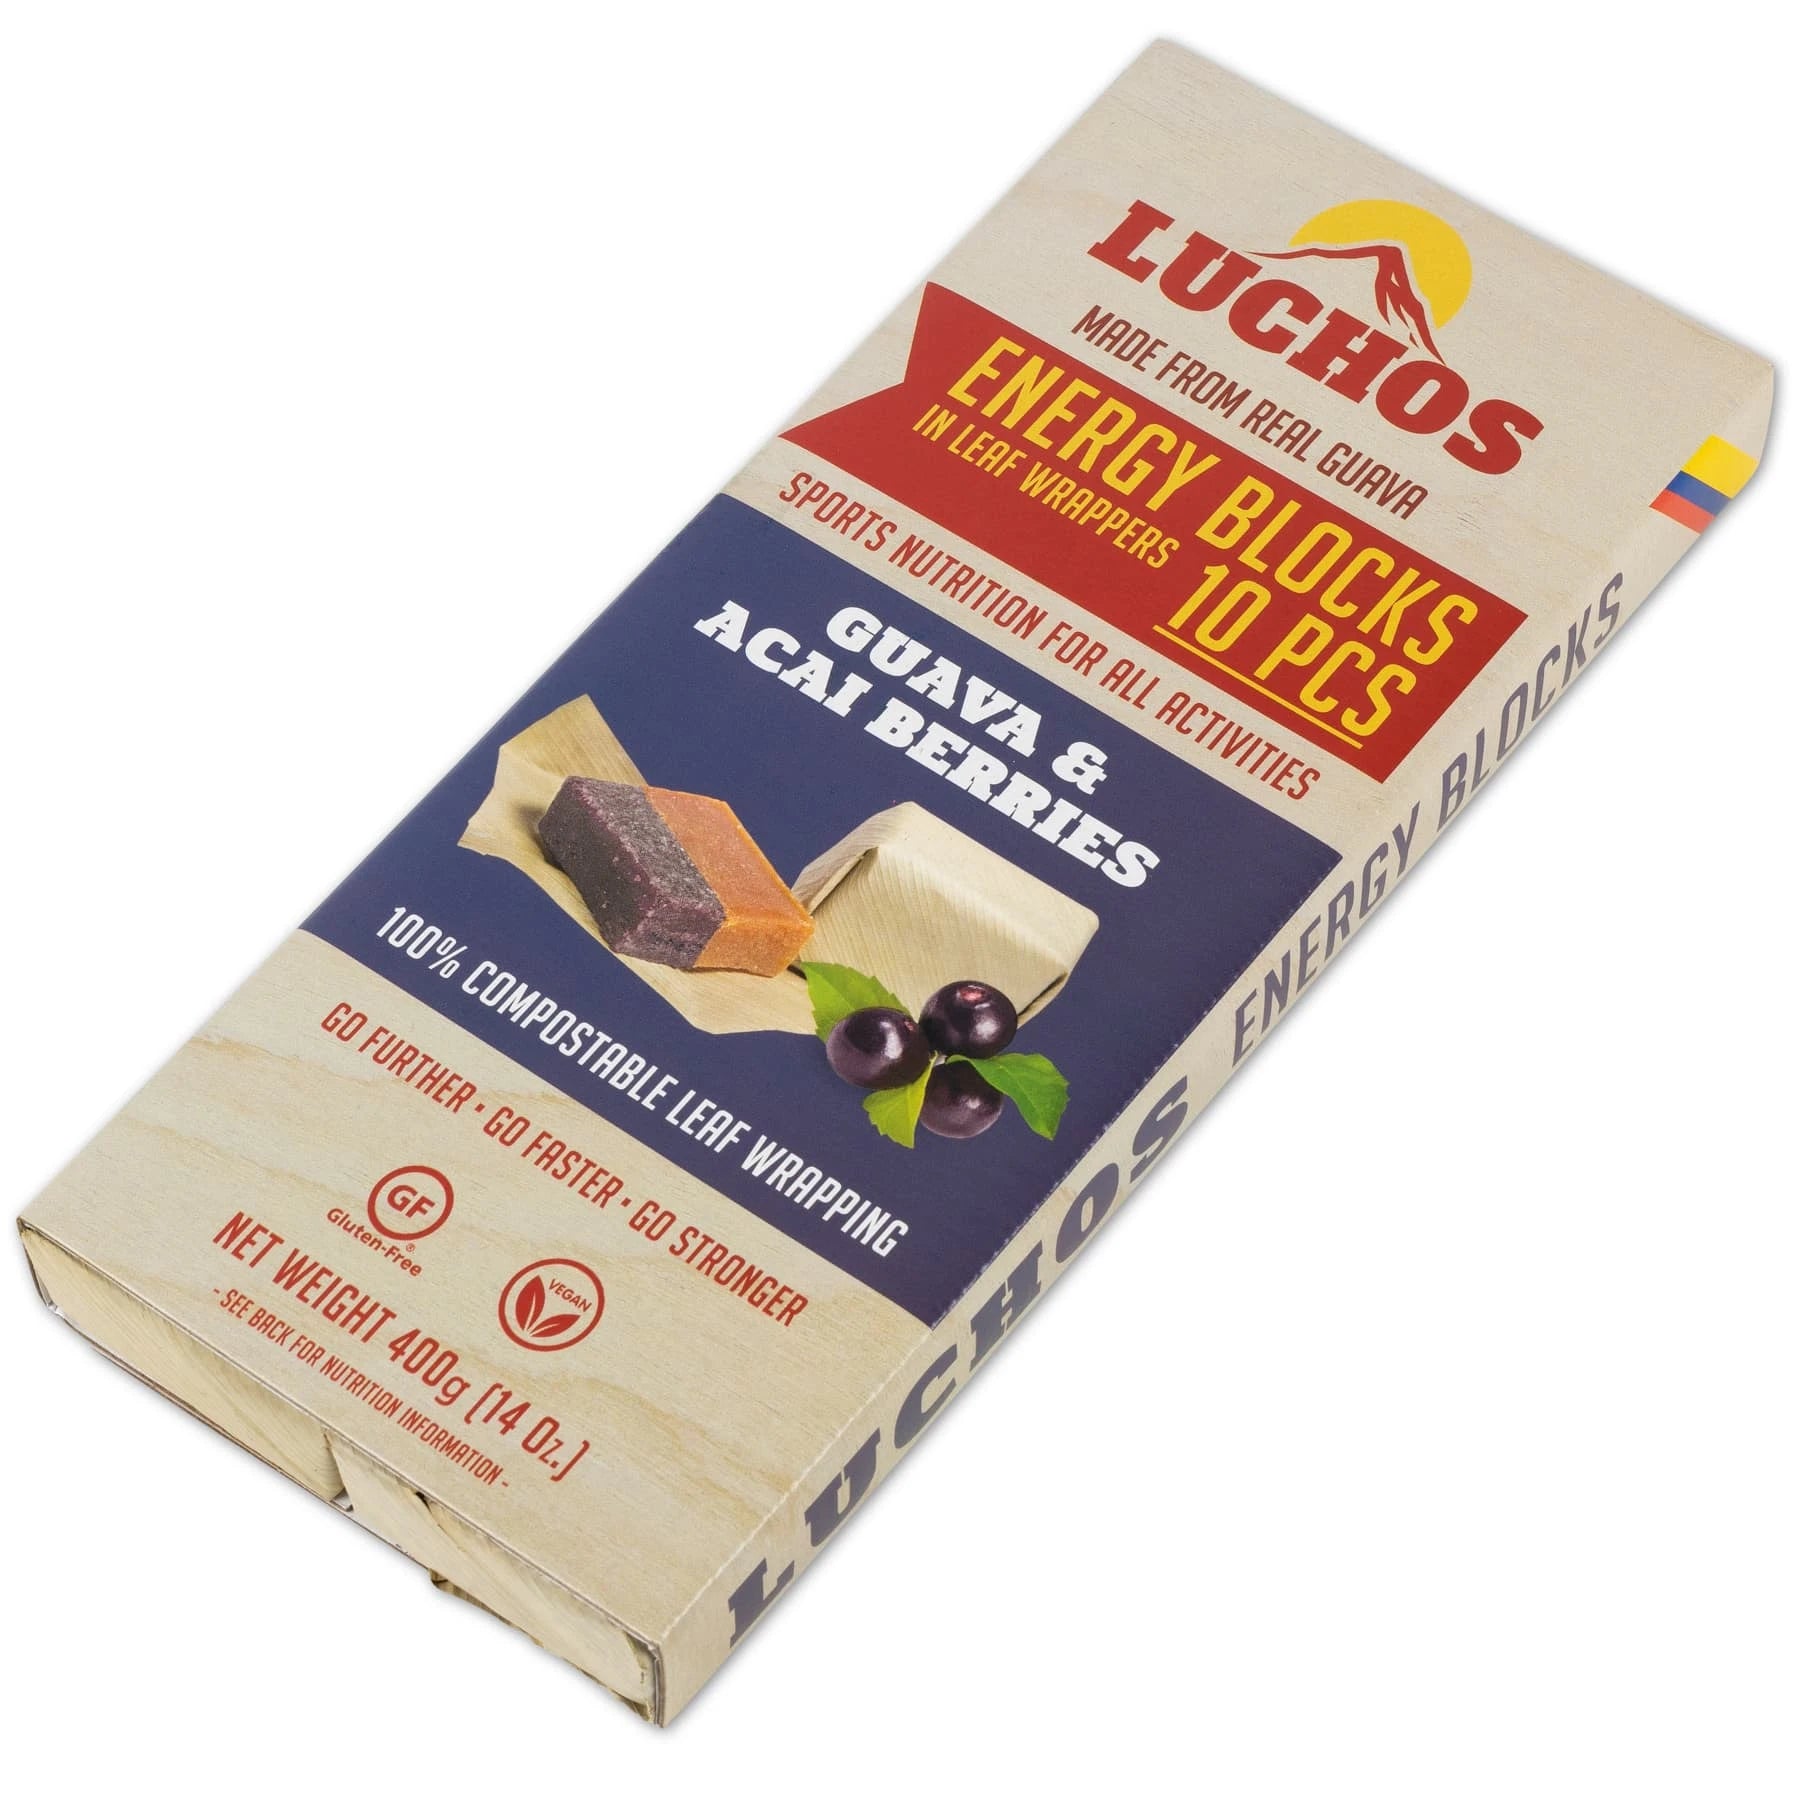 LUCHOS Energy Blocks Pack of 10 - different types